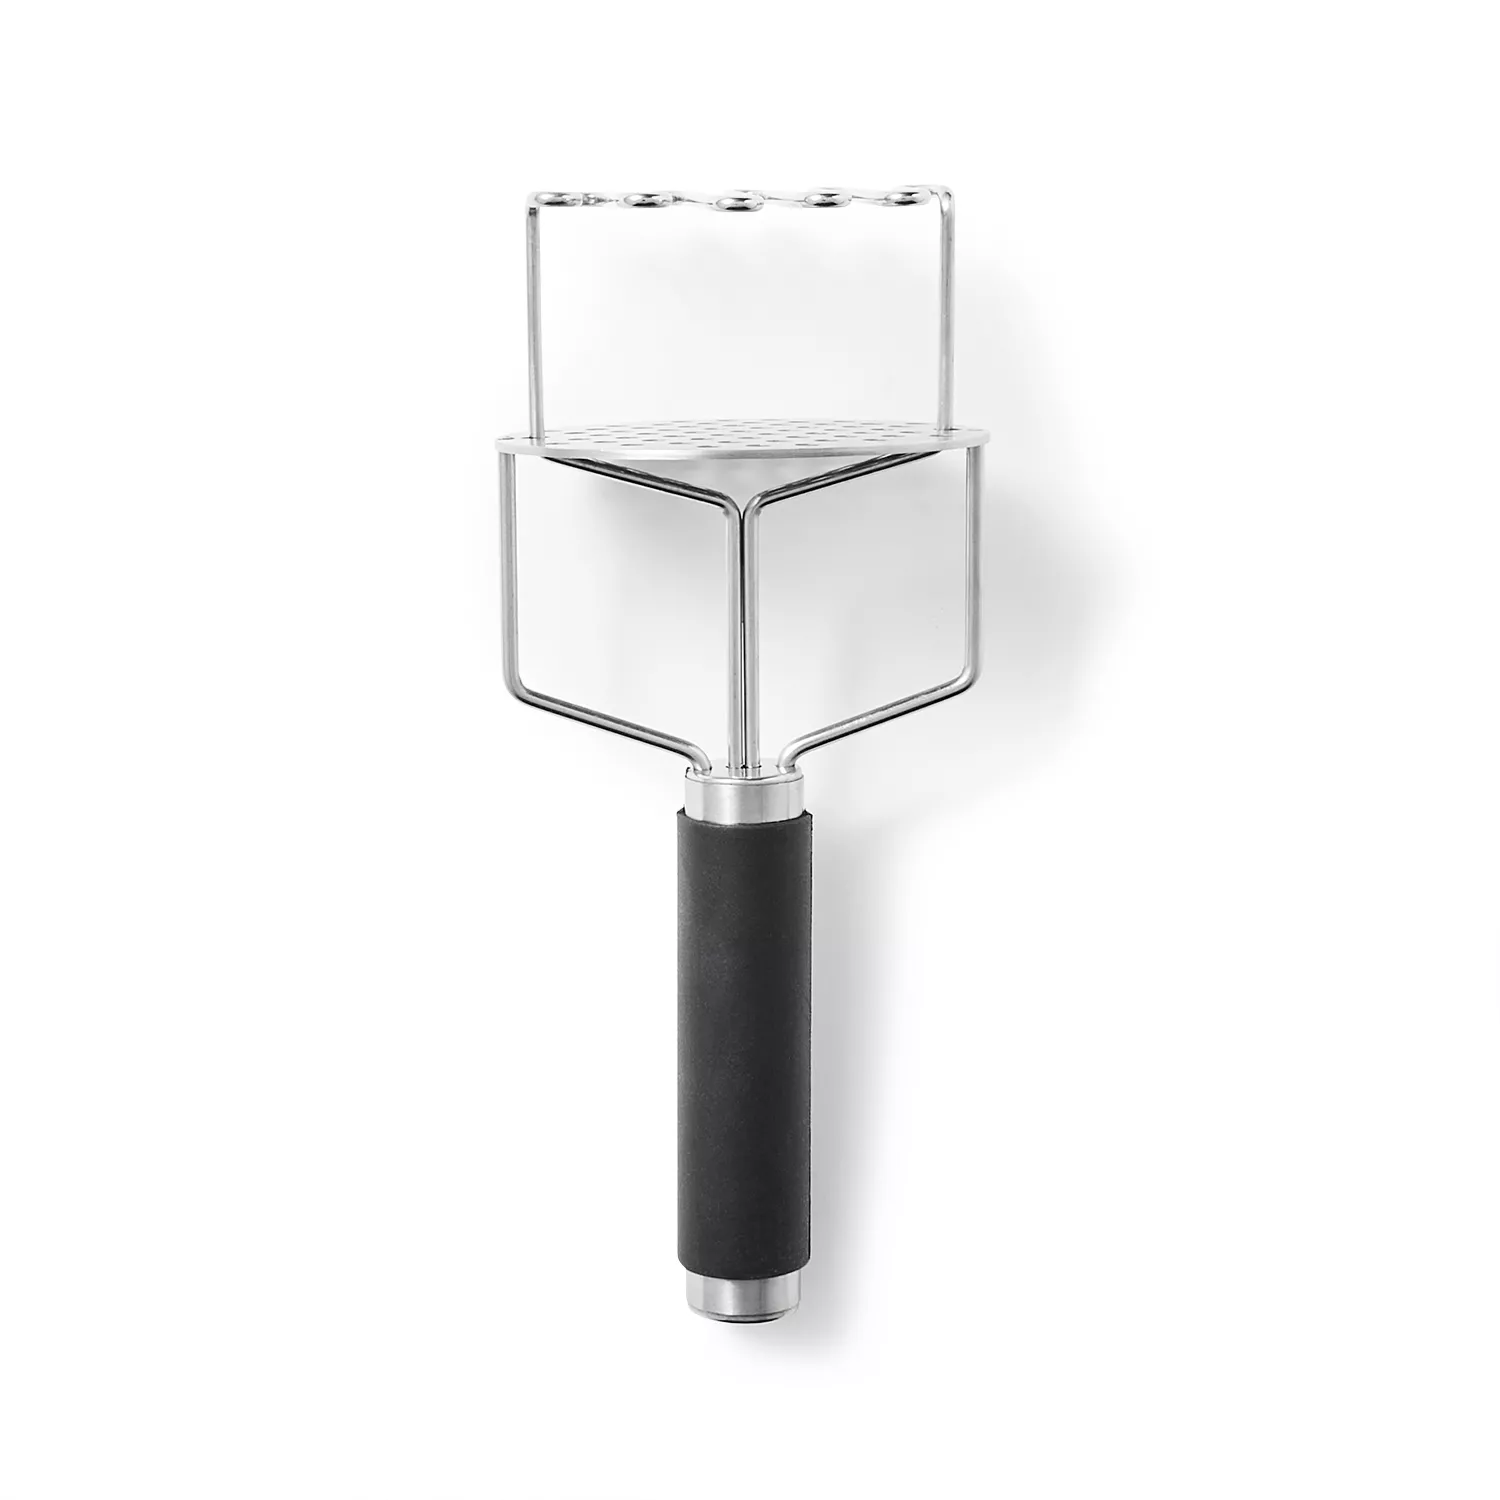 Zyliss Miniature Masher and Scoop